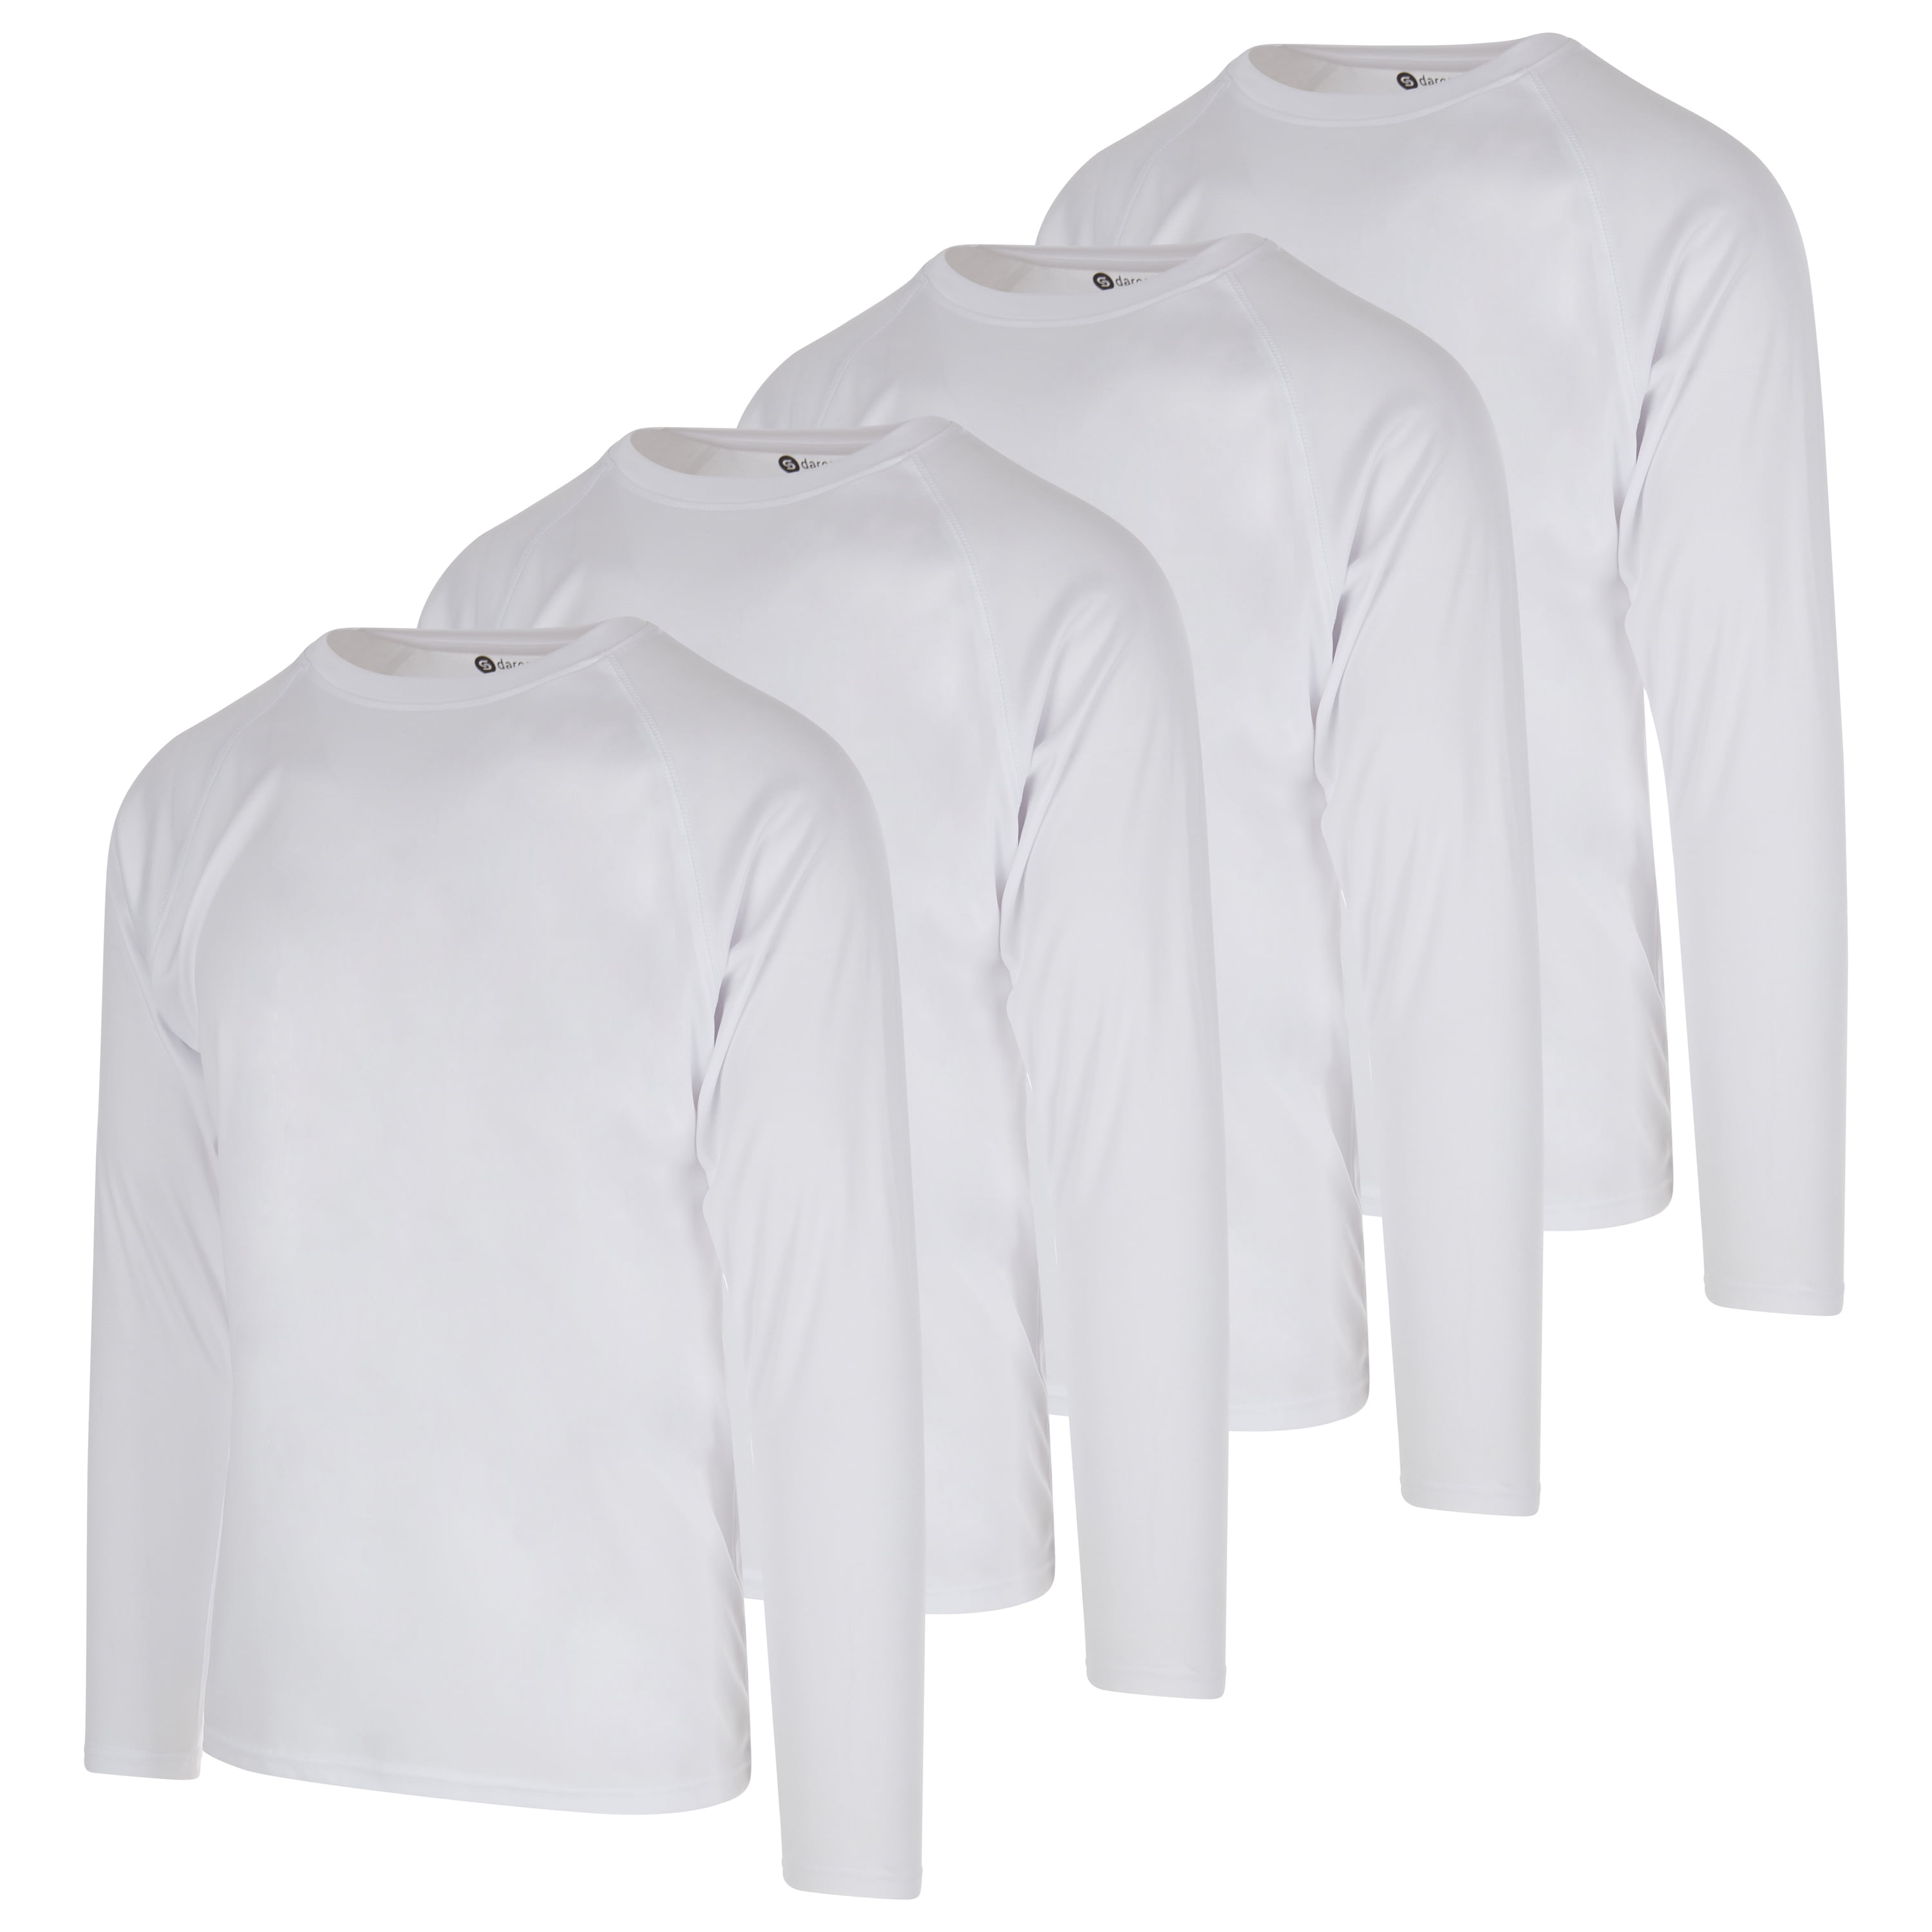 DARESAY Dri-Fit Long Sleeve T Shirts for Men-4 Pack- Moisture Wicking,  Quick Dry Tees (Up to 3XL)